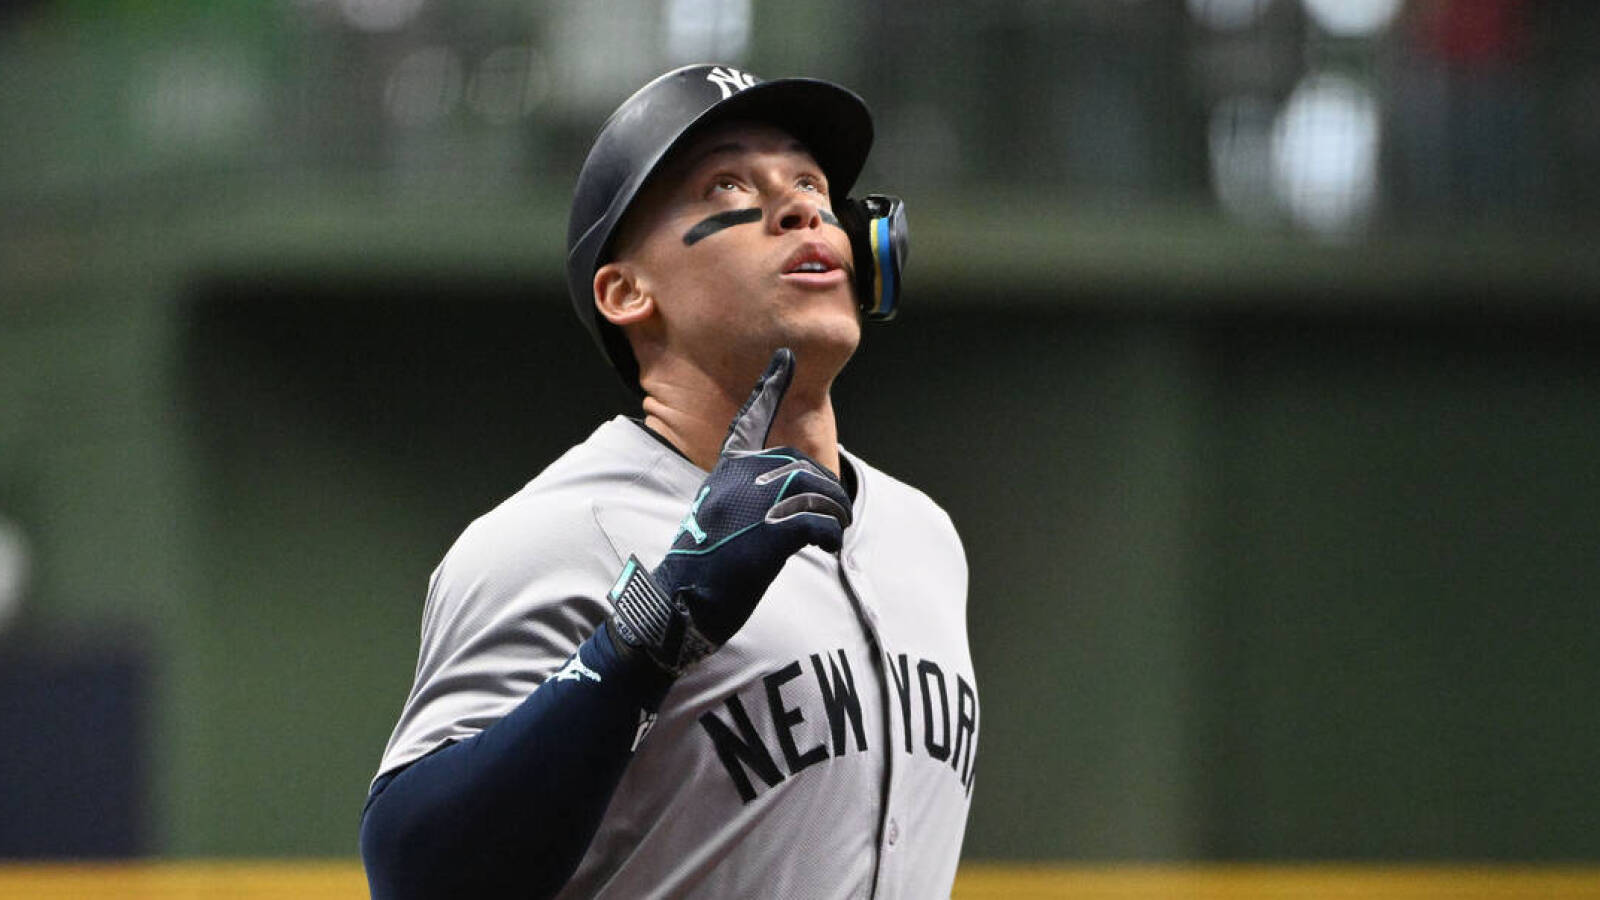 Watch: Yankees slugger Aaron Judge homers for second straight game vs. Brewers